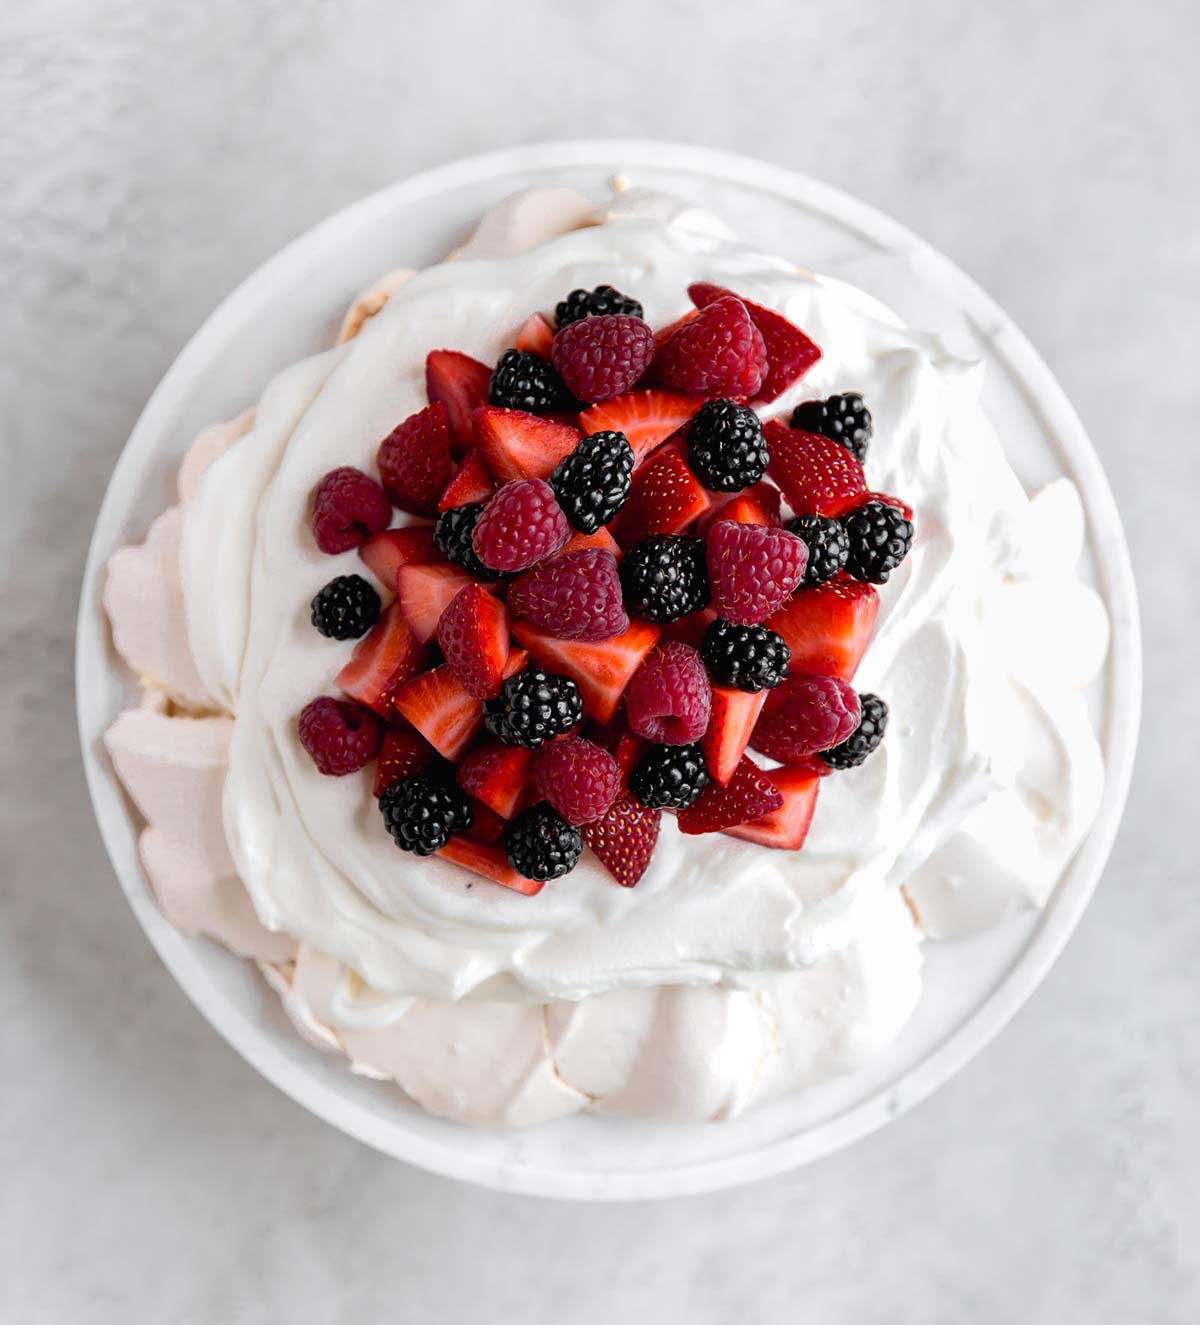 An overhead view of this classic Pavlova recipe served on a glass cake stand with whipped cream and berries.